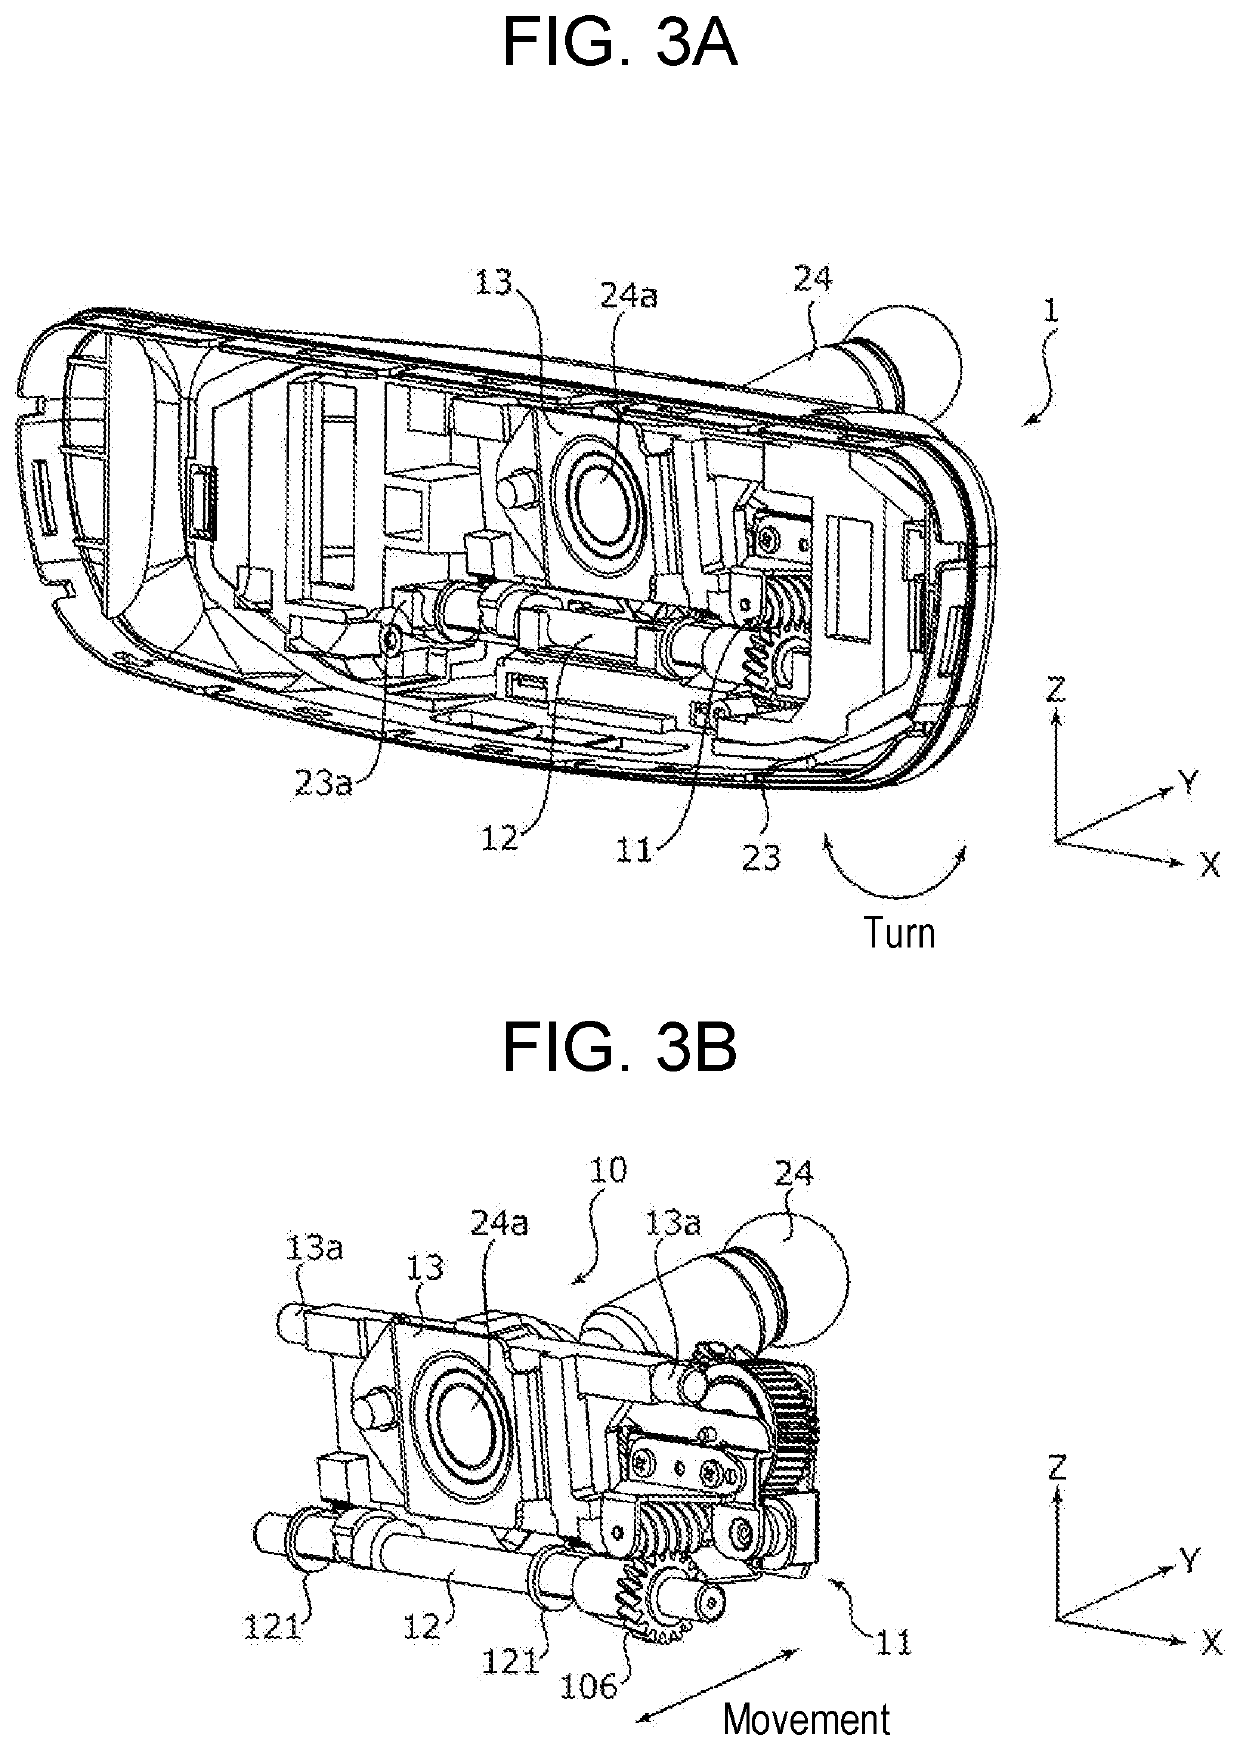 Vehicular rearview mirror device